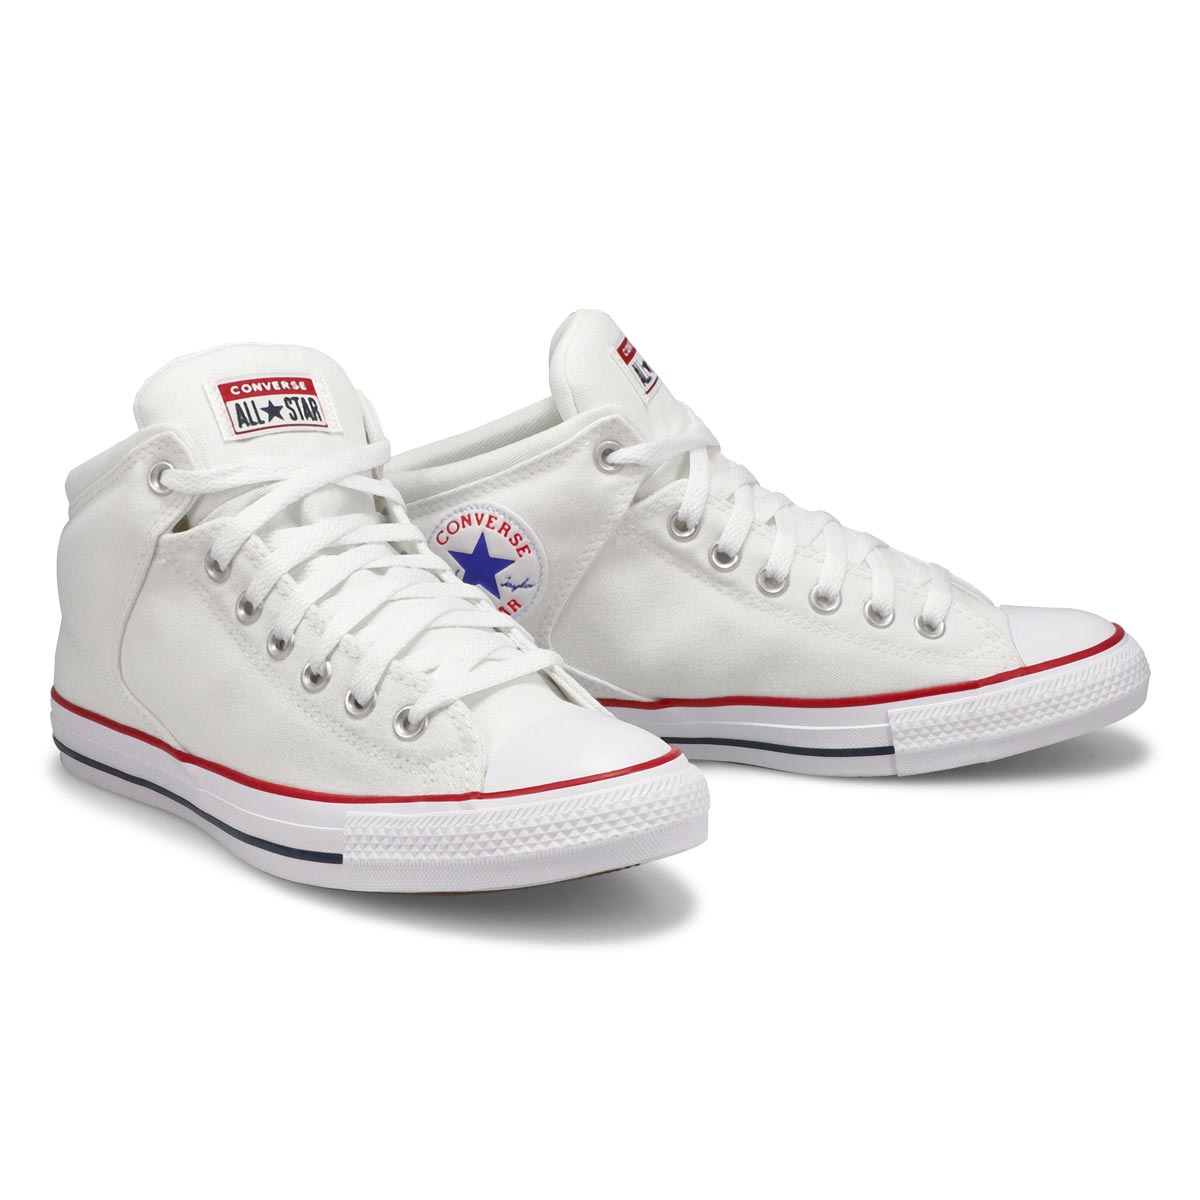 Baskets CHUCK TAYLOR ALL STAR HIGH STREET, blanc/rouge, hommes